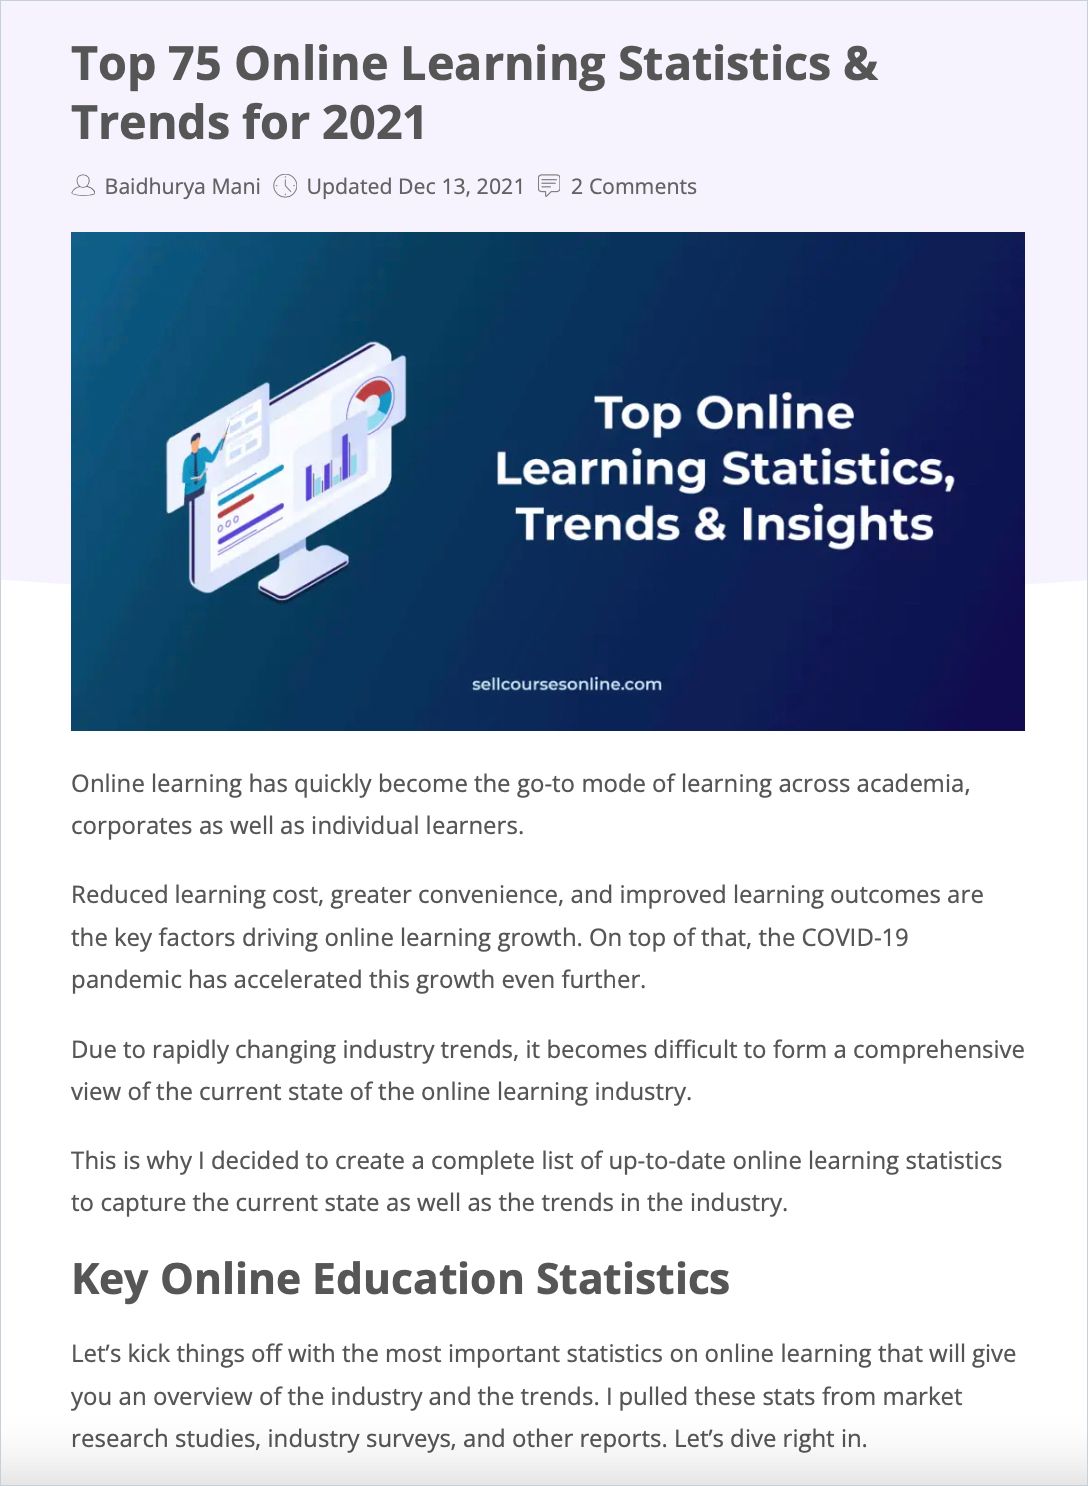 Top 75 Online Learning Statistics & Trends for 2021 Book Cover